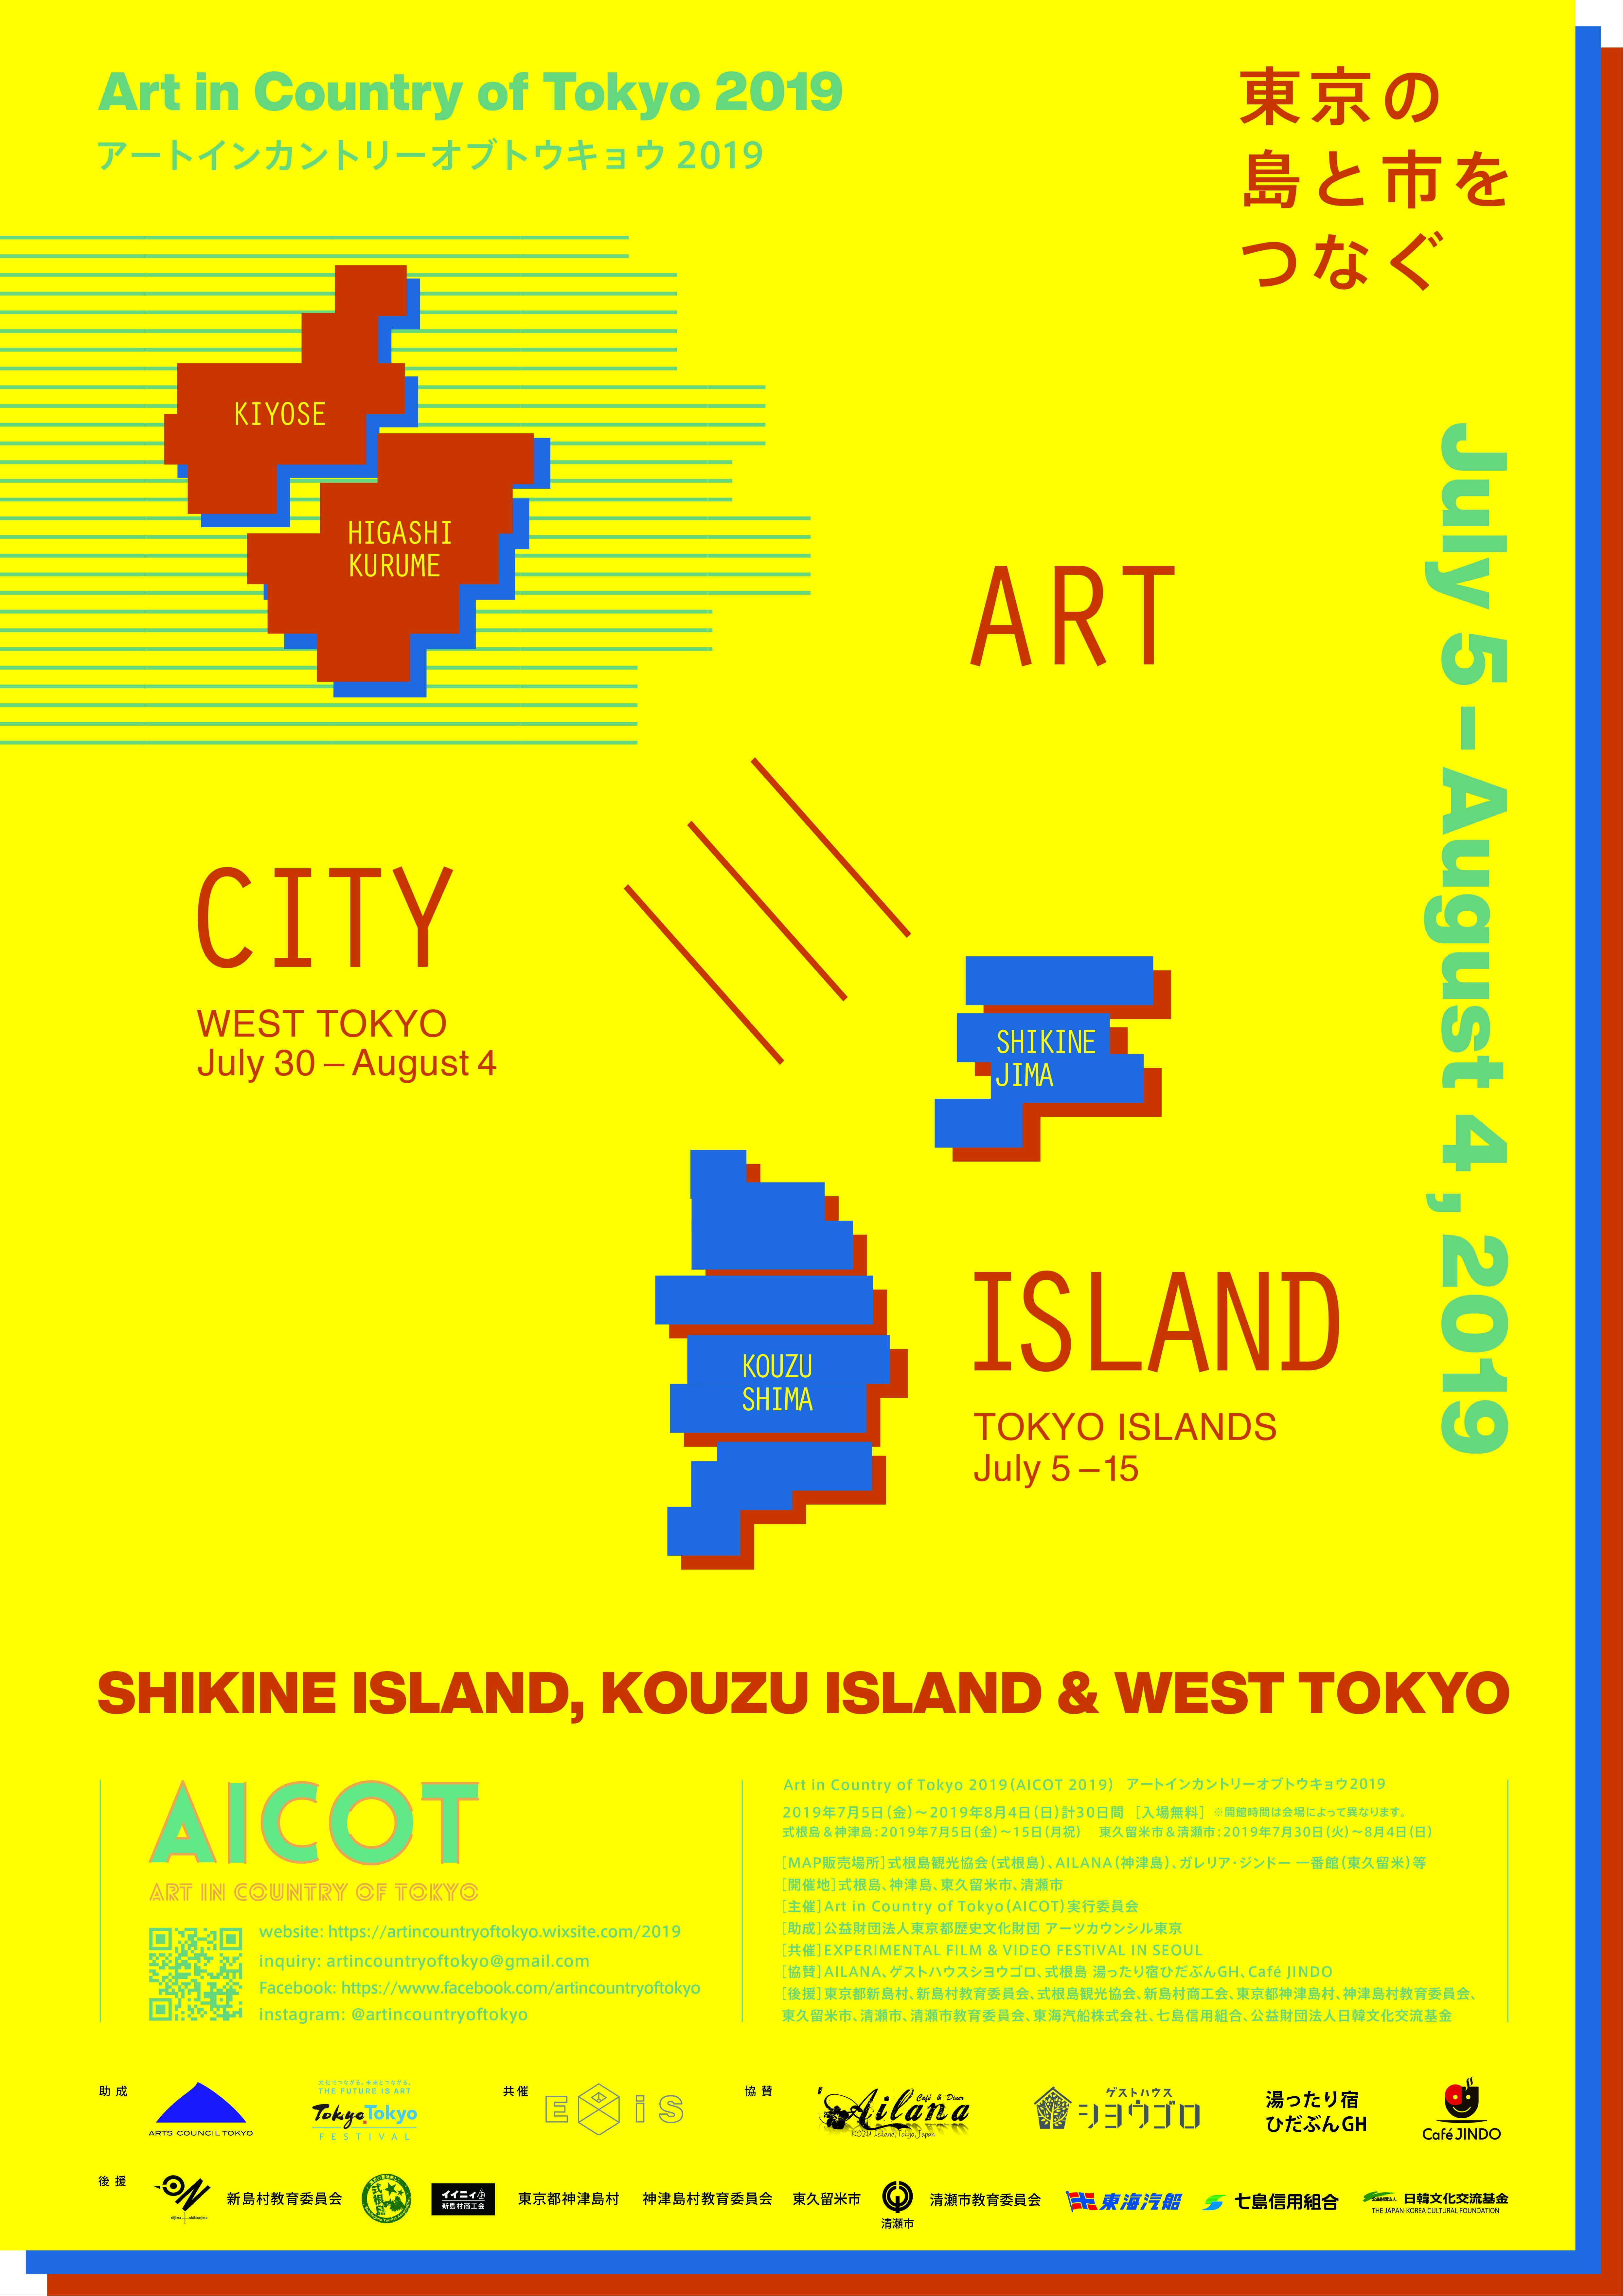 Art in Country of Tokyo 2019